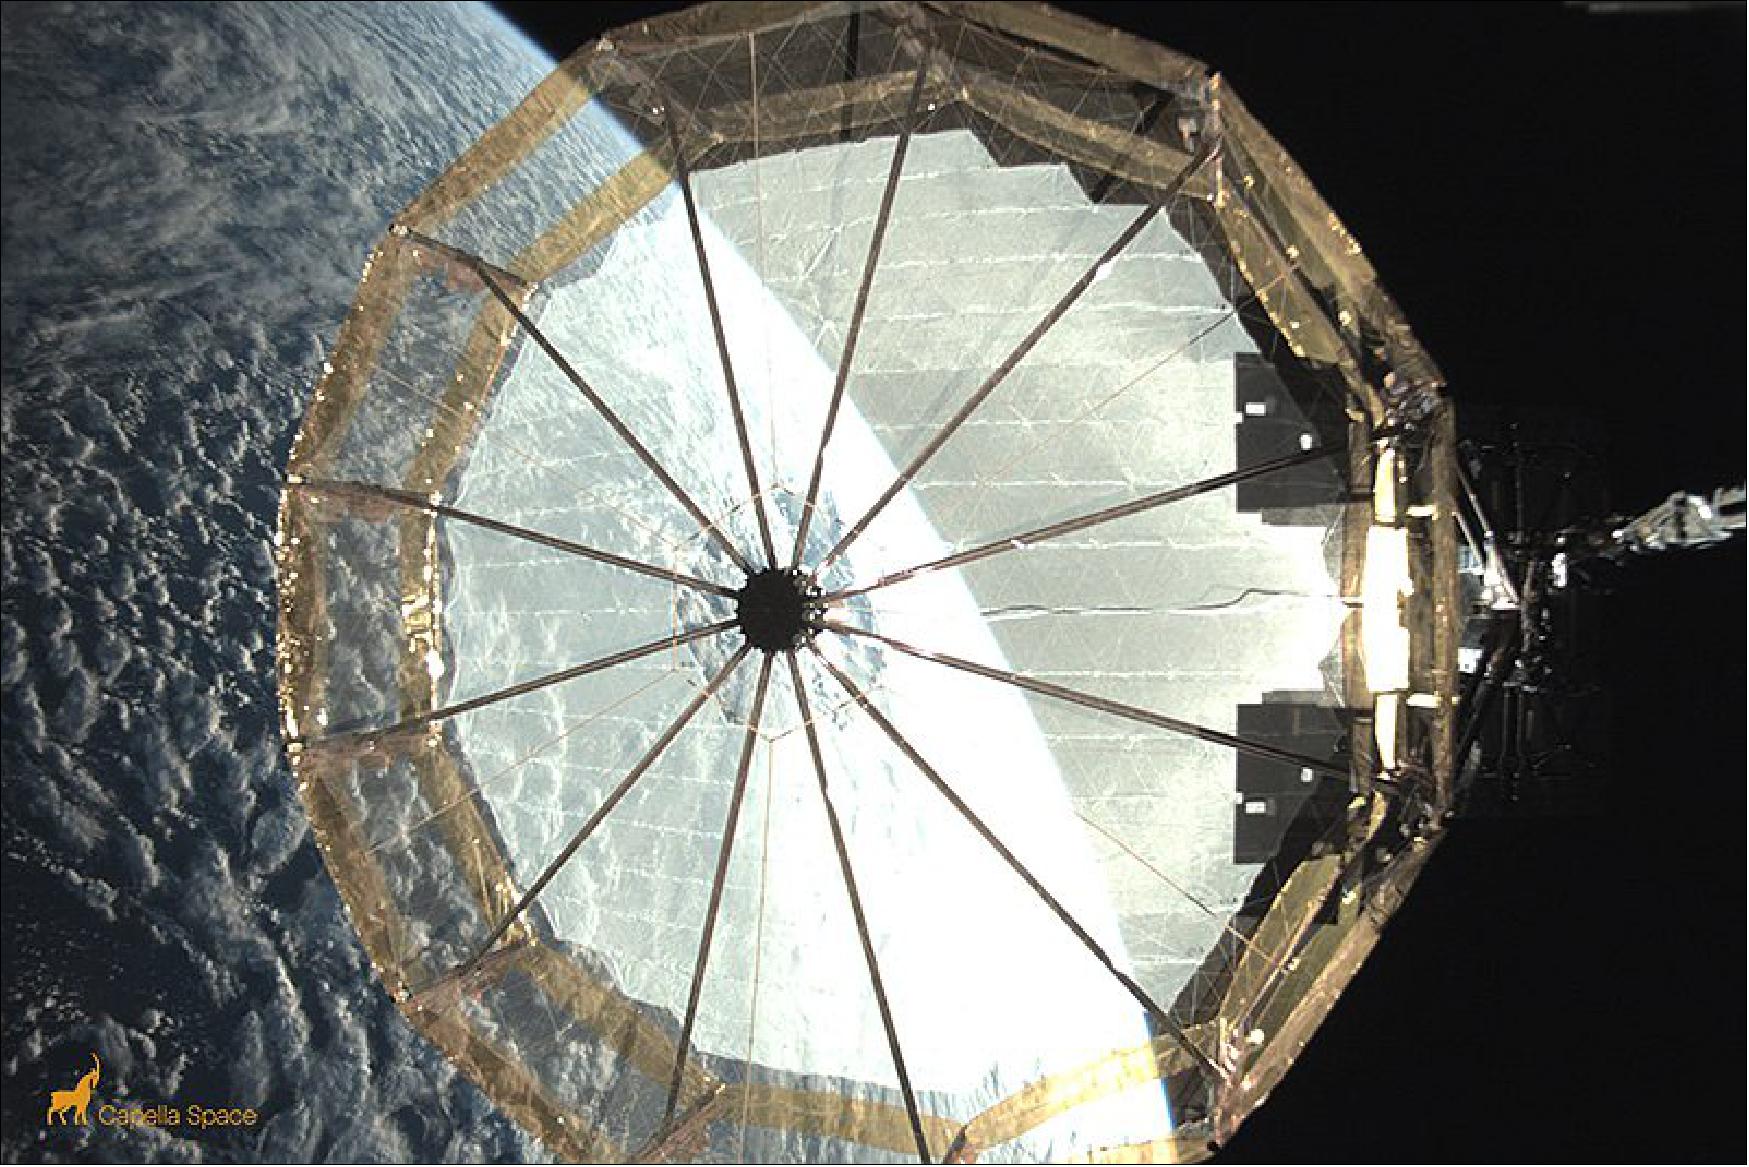 Figure 12: Reflector Antenna Deployment. Engineers deployed the antenna over a series of ground contacts, tensioning the instrument to millimeter-level precision. In this image, you can see the final deployment of our mesh-based reflector antenna. It’s designed to deliver high-contrast, high-resolution and low-noise imagery (image credit: Capella Space)